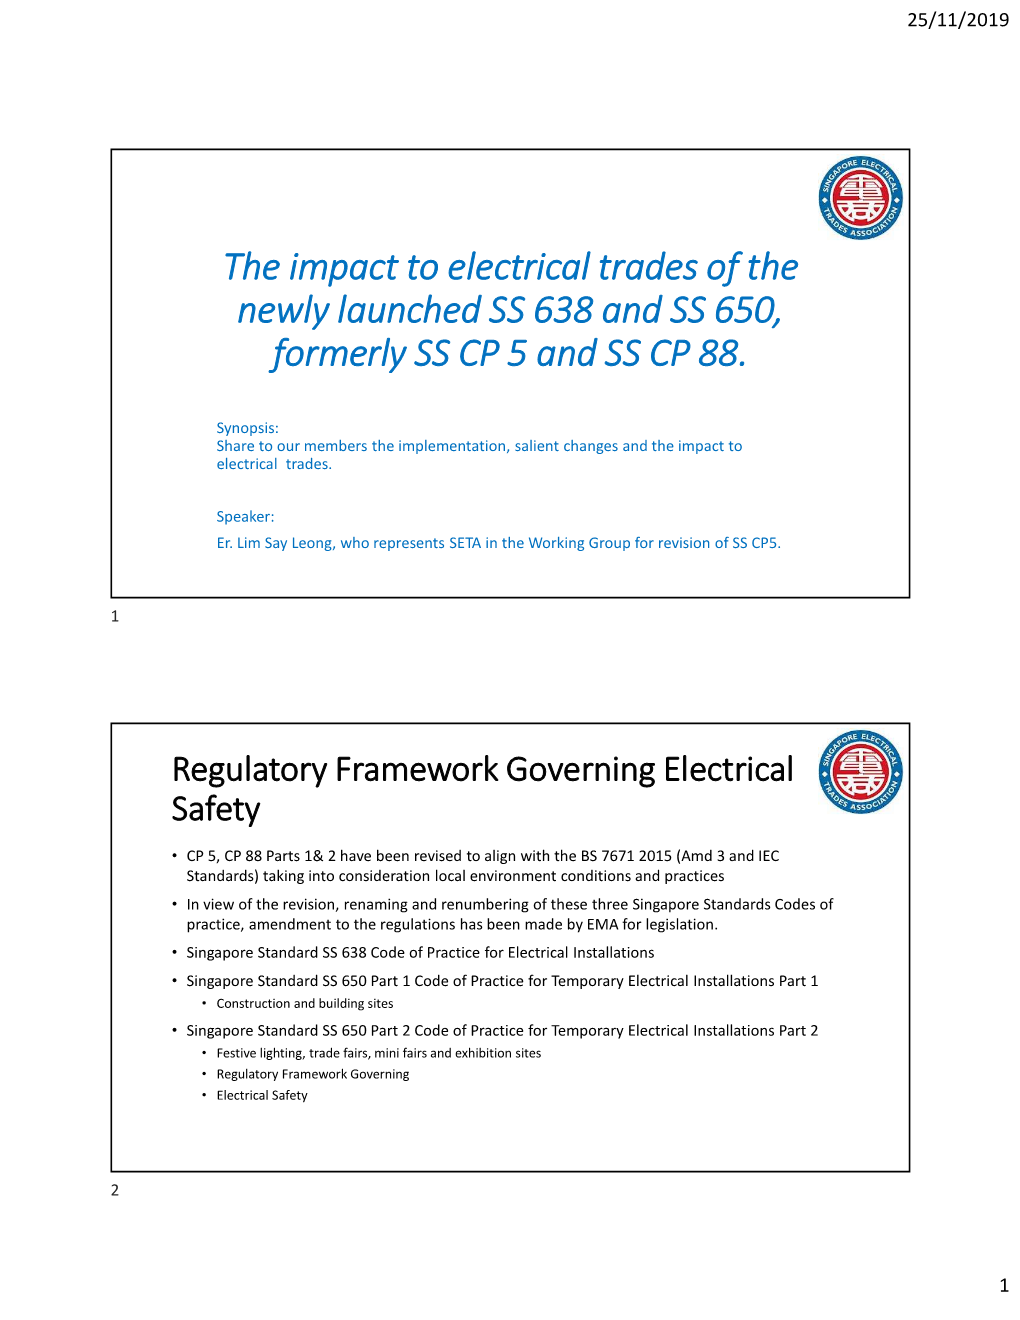 The Impact to Electrical Trades of the Newly Launched SS 638 and SS 650, Formerly SS CP 5 and SS CP 88